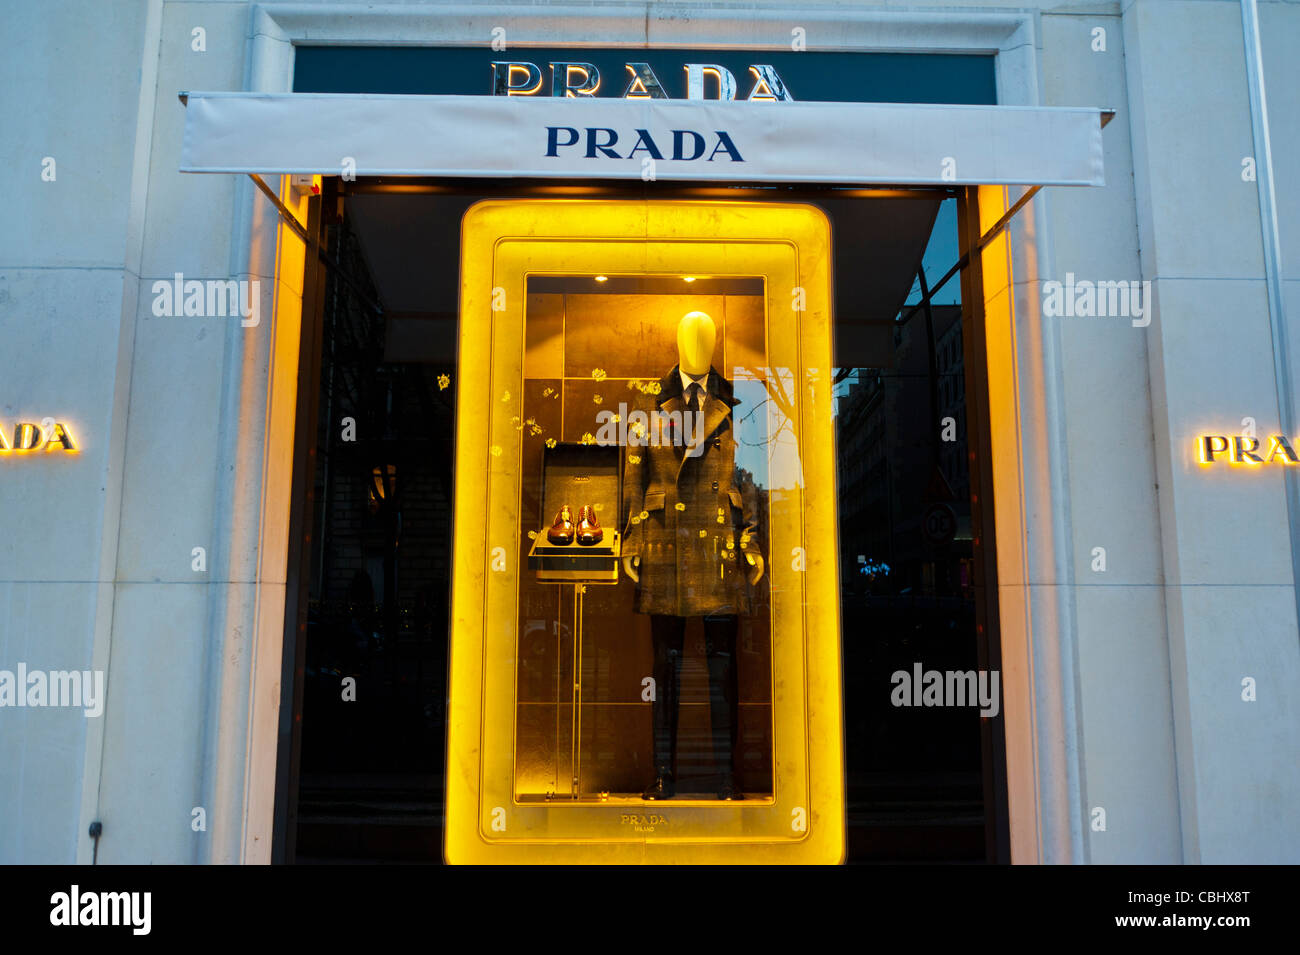 Paris, France, Luxury Shopping, Prada Luxury Clothing Store, Shop Front,  Window Display "Avenue Montaigne" fashion clothes shop name, Rich Products  Stock Photo - Alamy